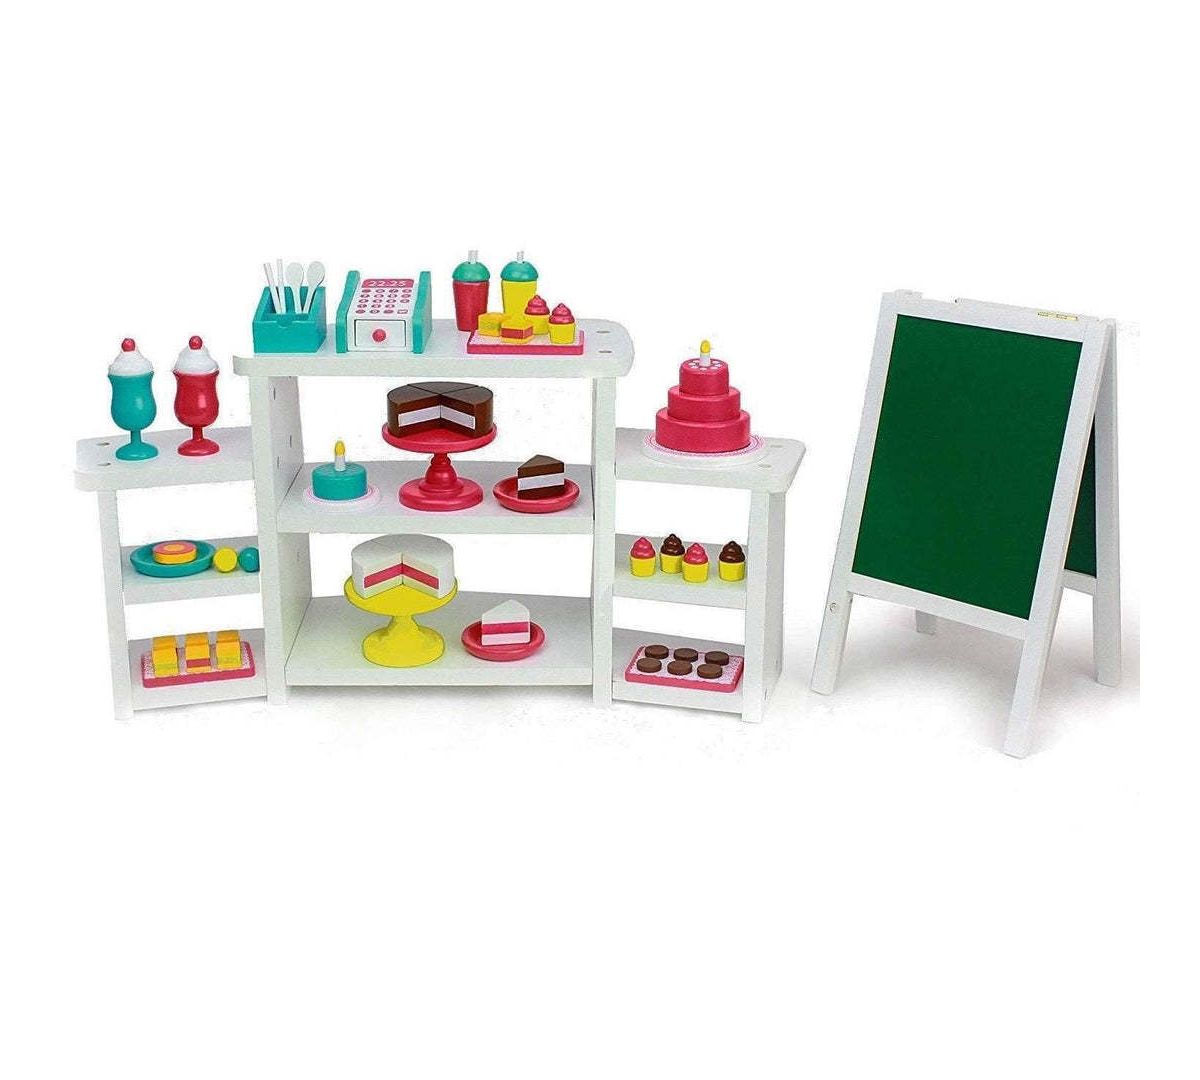 50 Piece Doll Bakery Wood Furniture Set Playtime by Eimmie